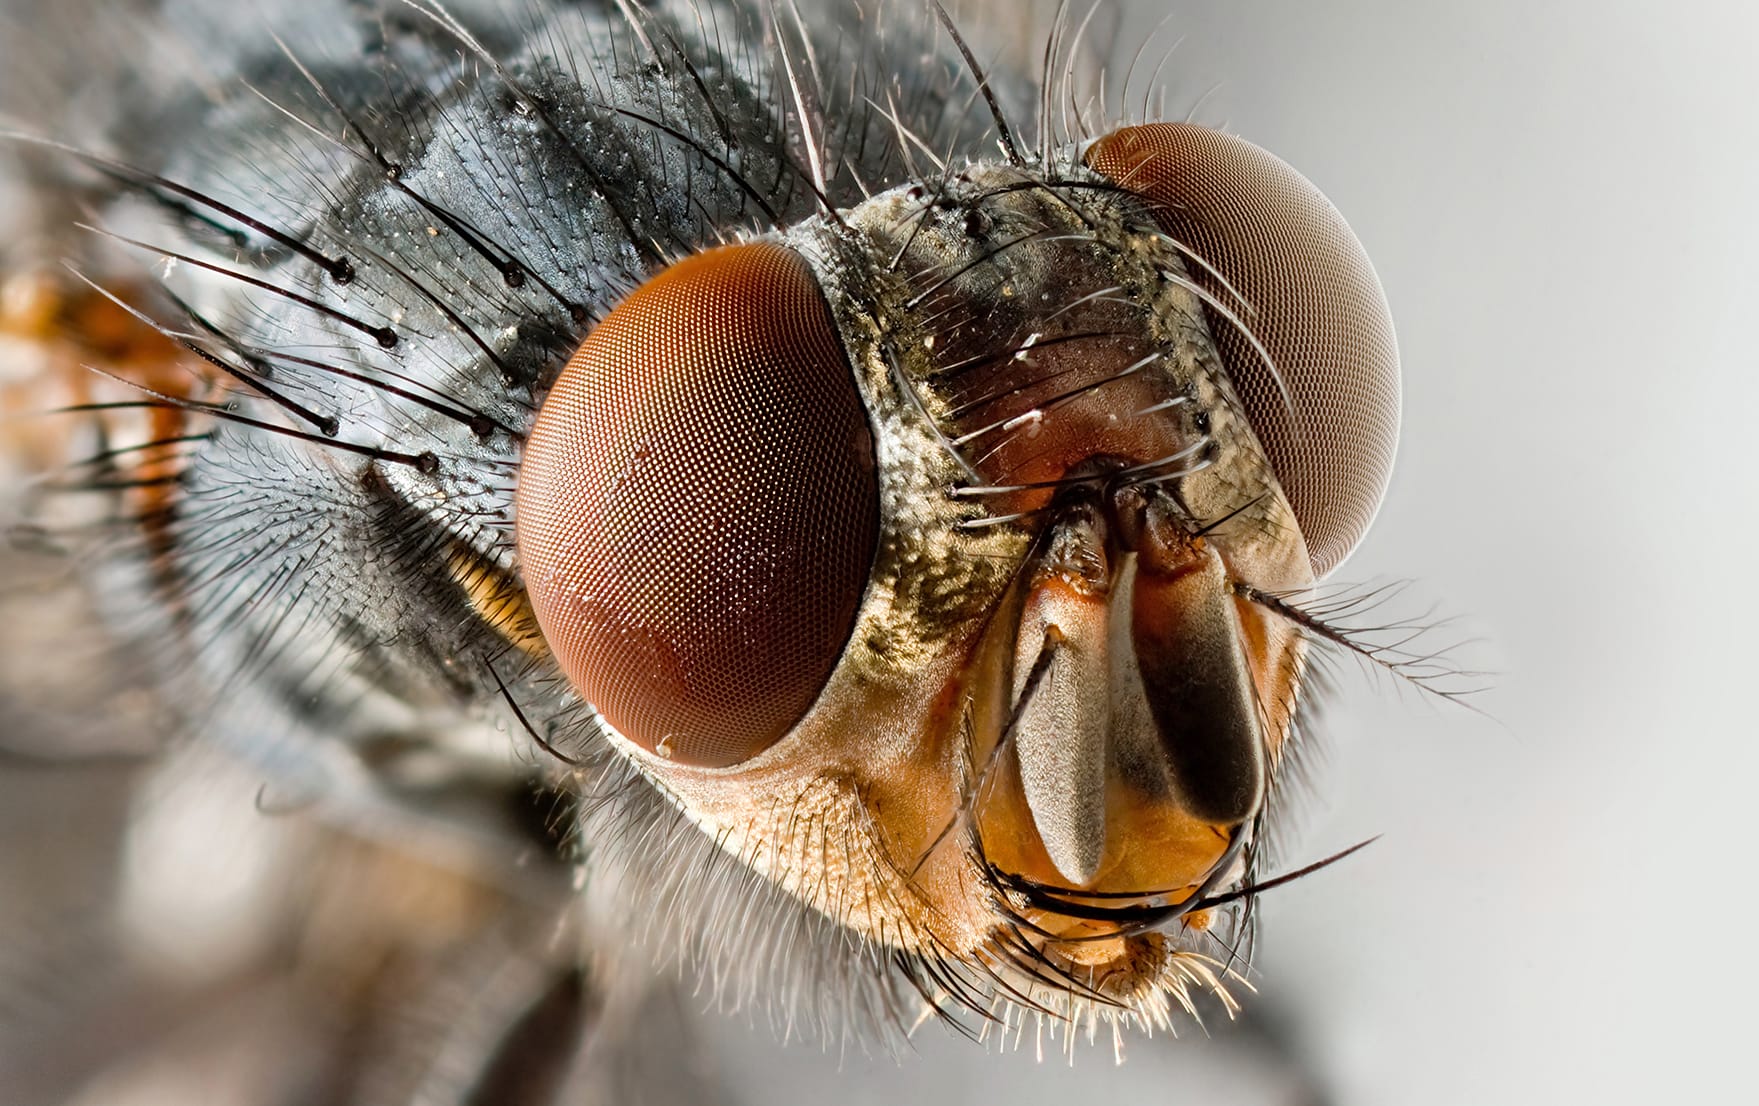 Flies carry more diseases than first thought